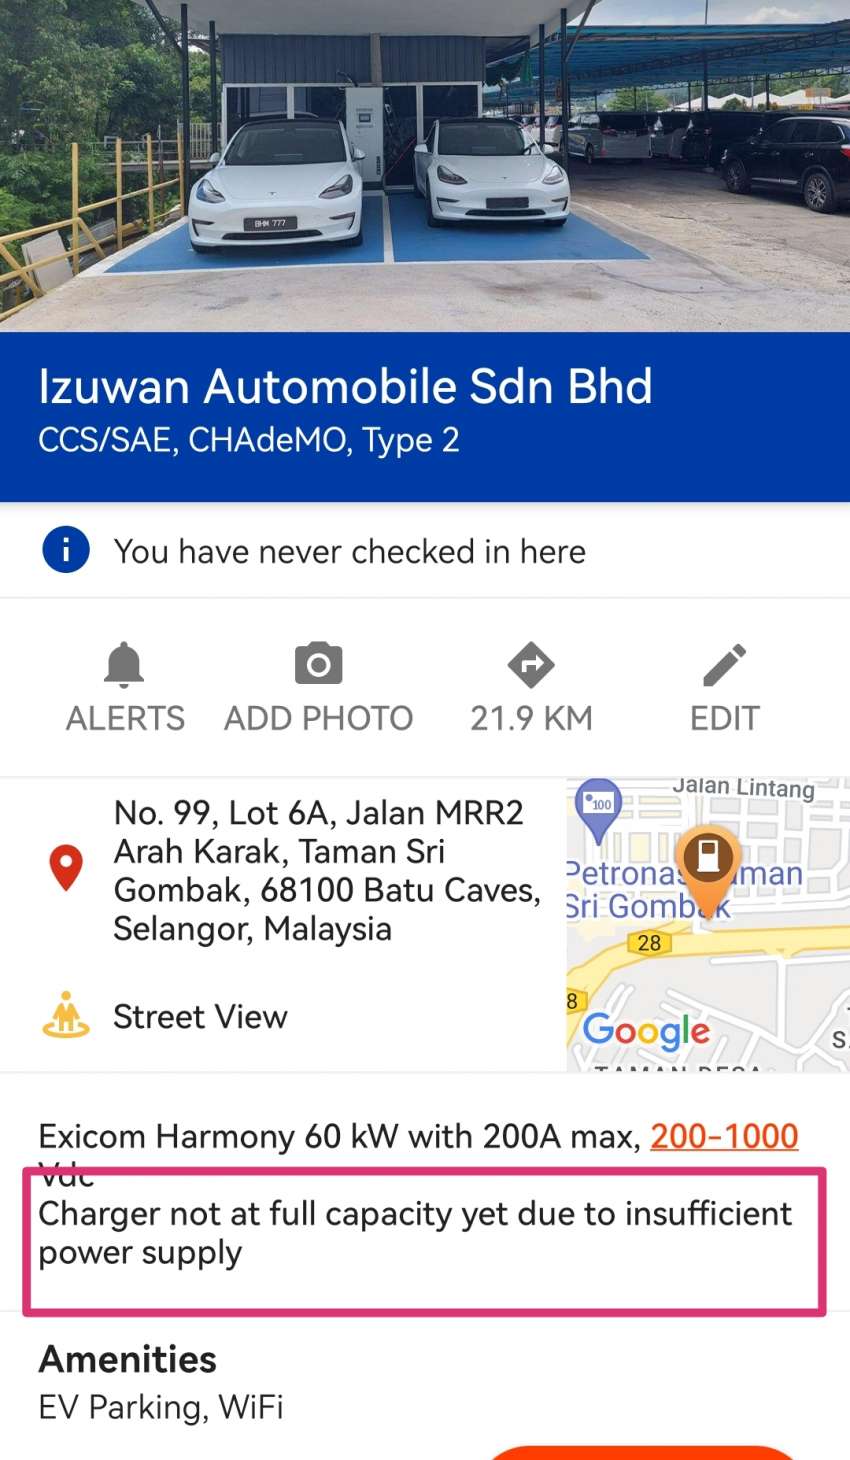 DC fast charging network in Malaysia – implementation delays must be addressed quickly, says MyEVOC 1446339